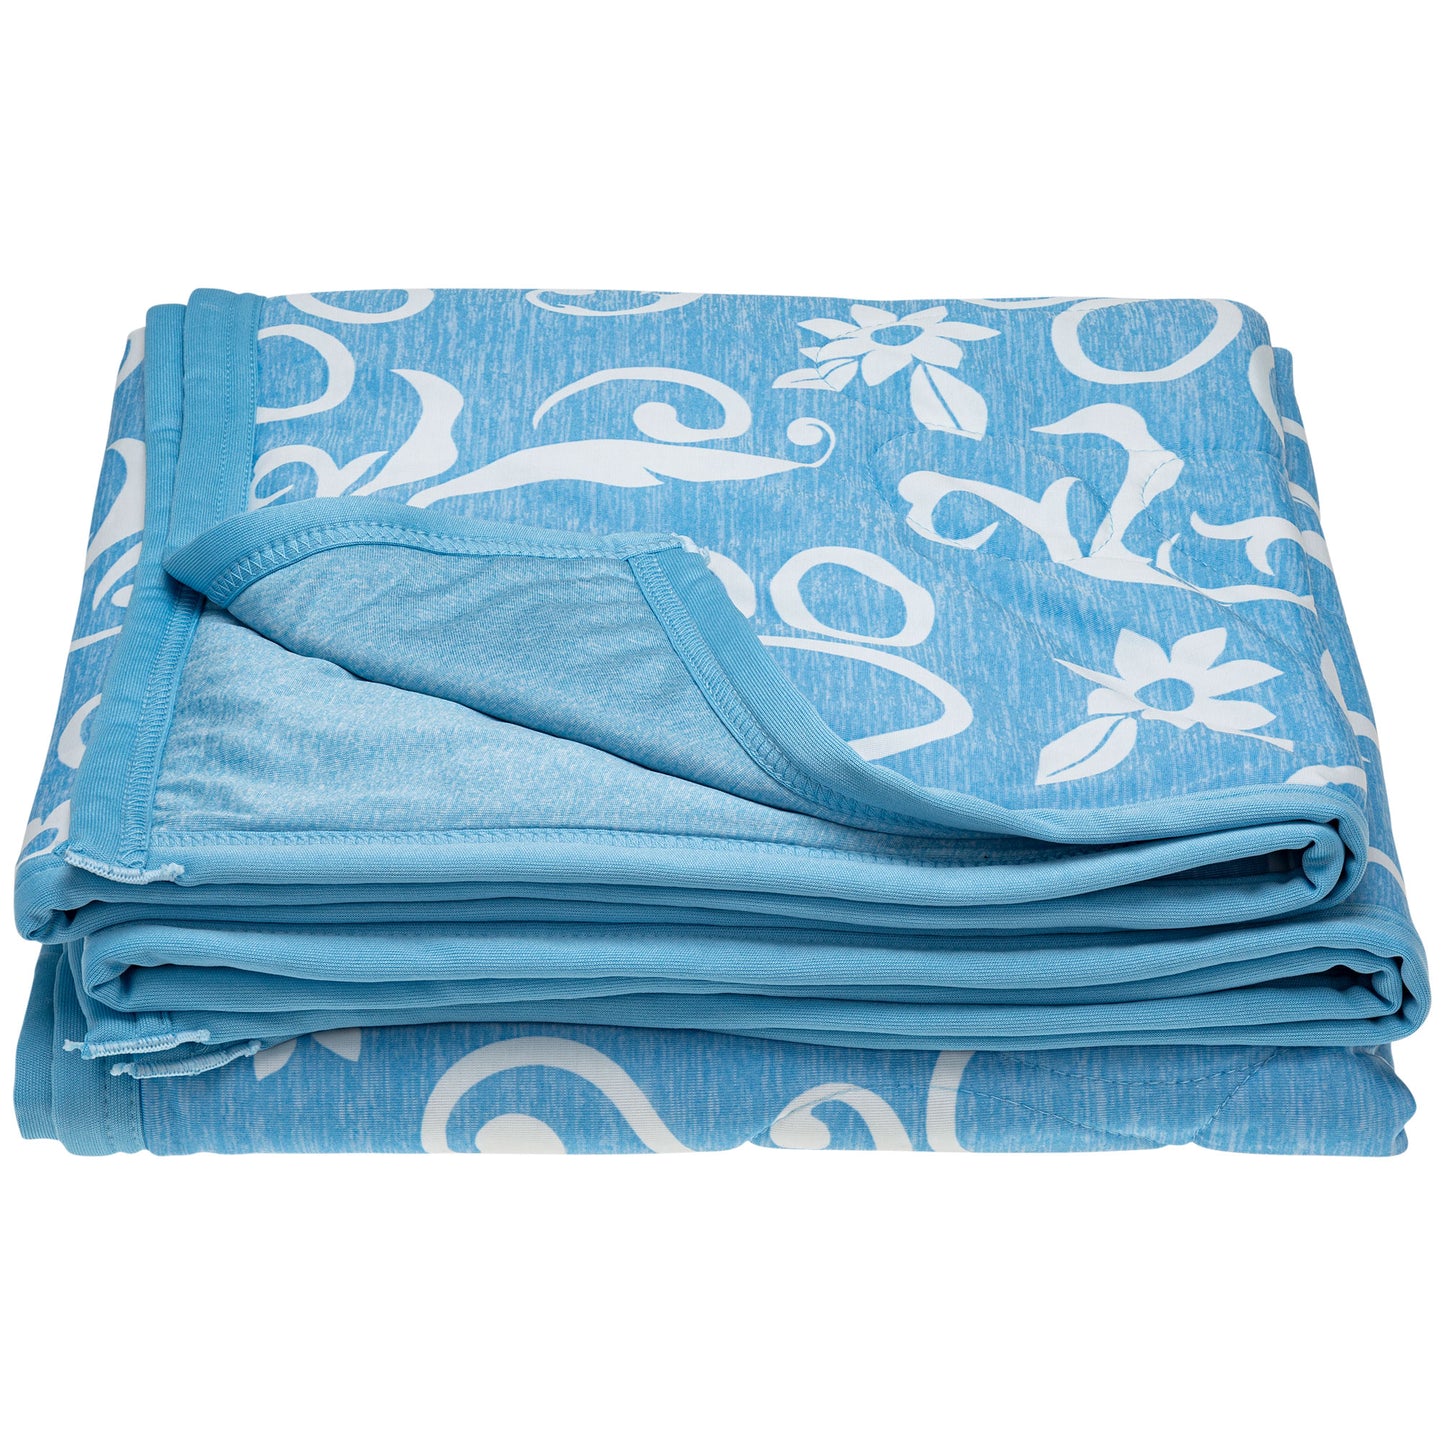 Swirling Paws Quilted Throw Blanket